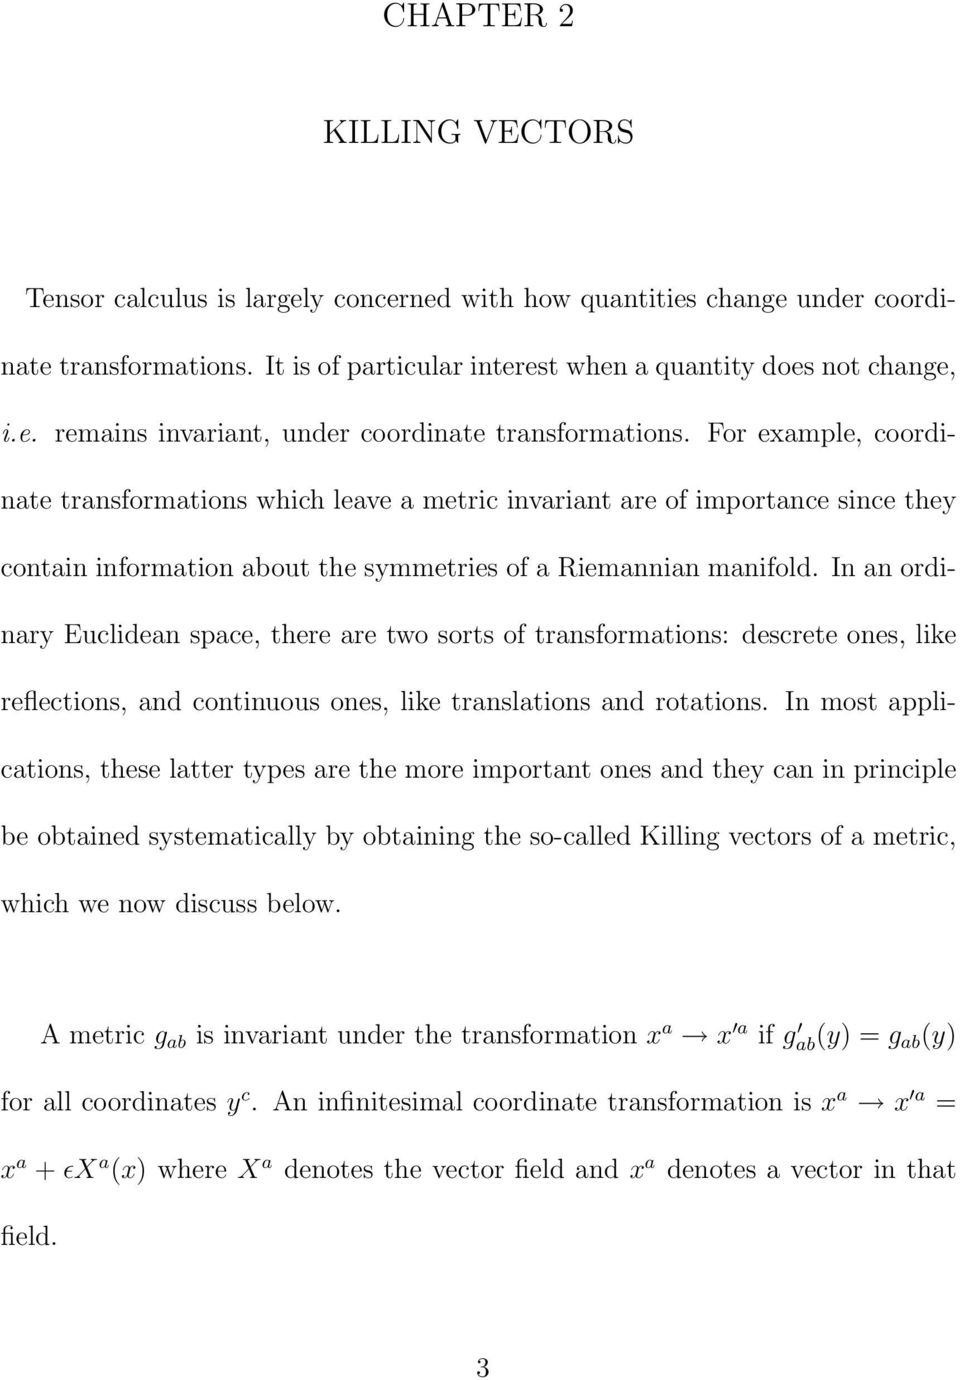 In an ordinary Euclidean space, there are two sorts of transformations: descrete ones, like reflections, and continuous ones, like translations and rotations.